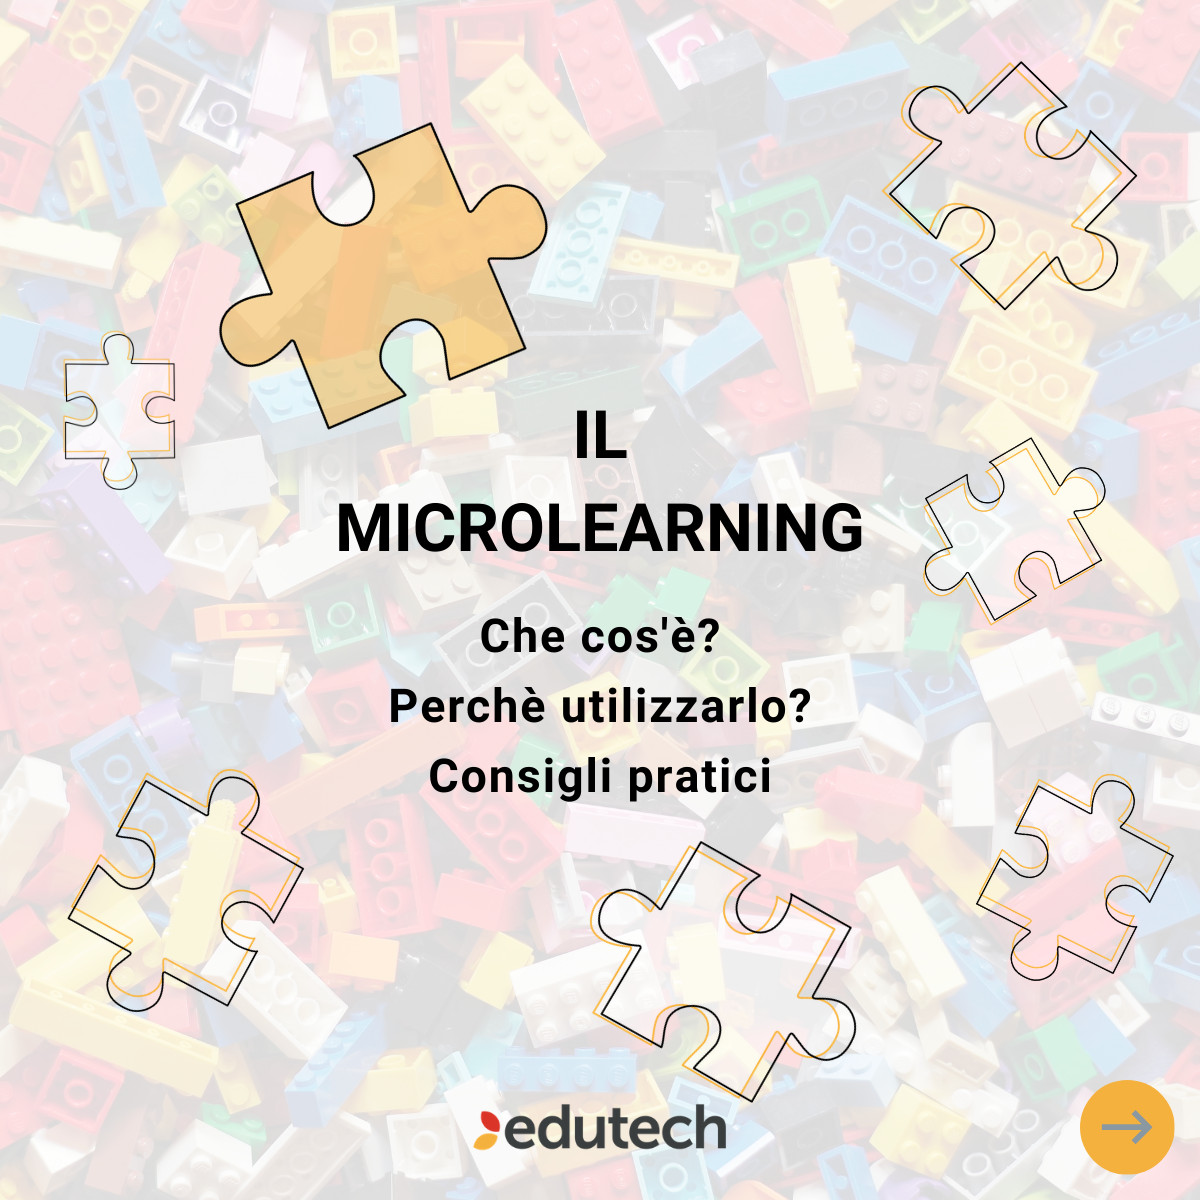 Il MicroLearning